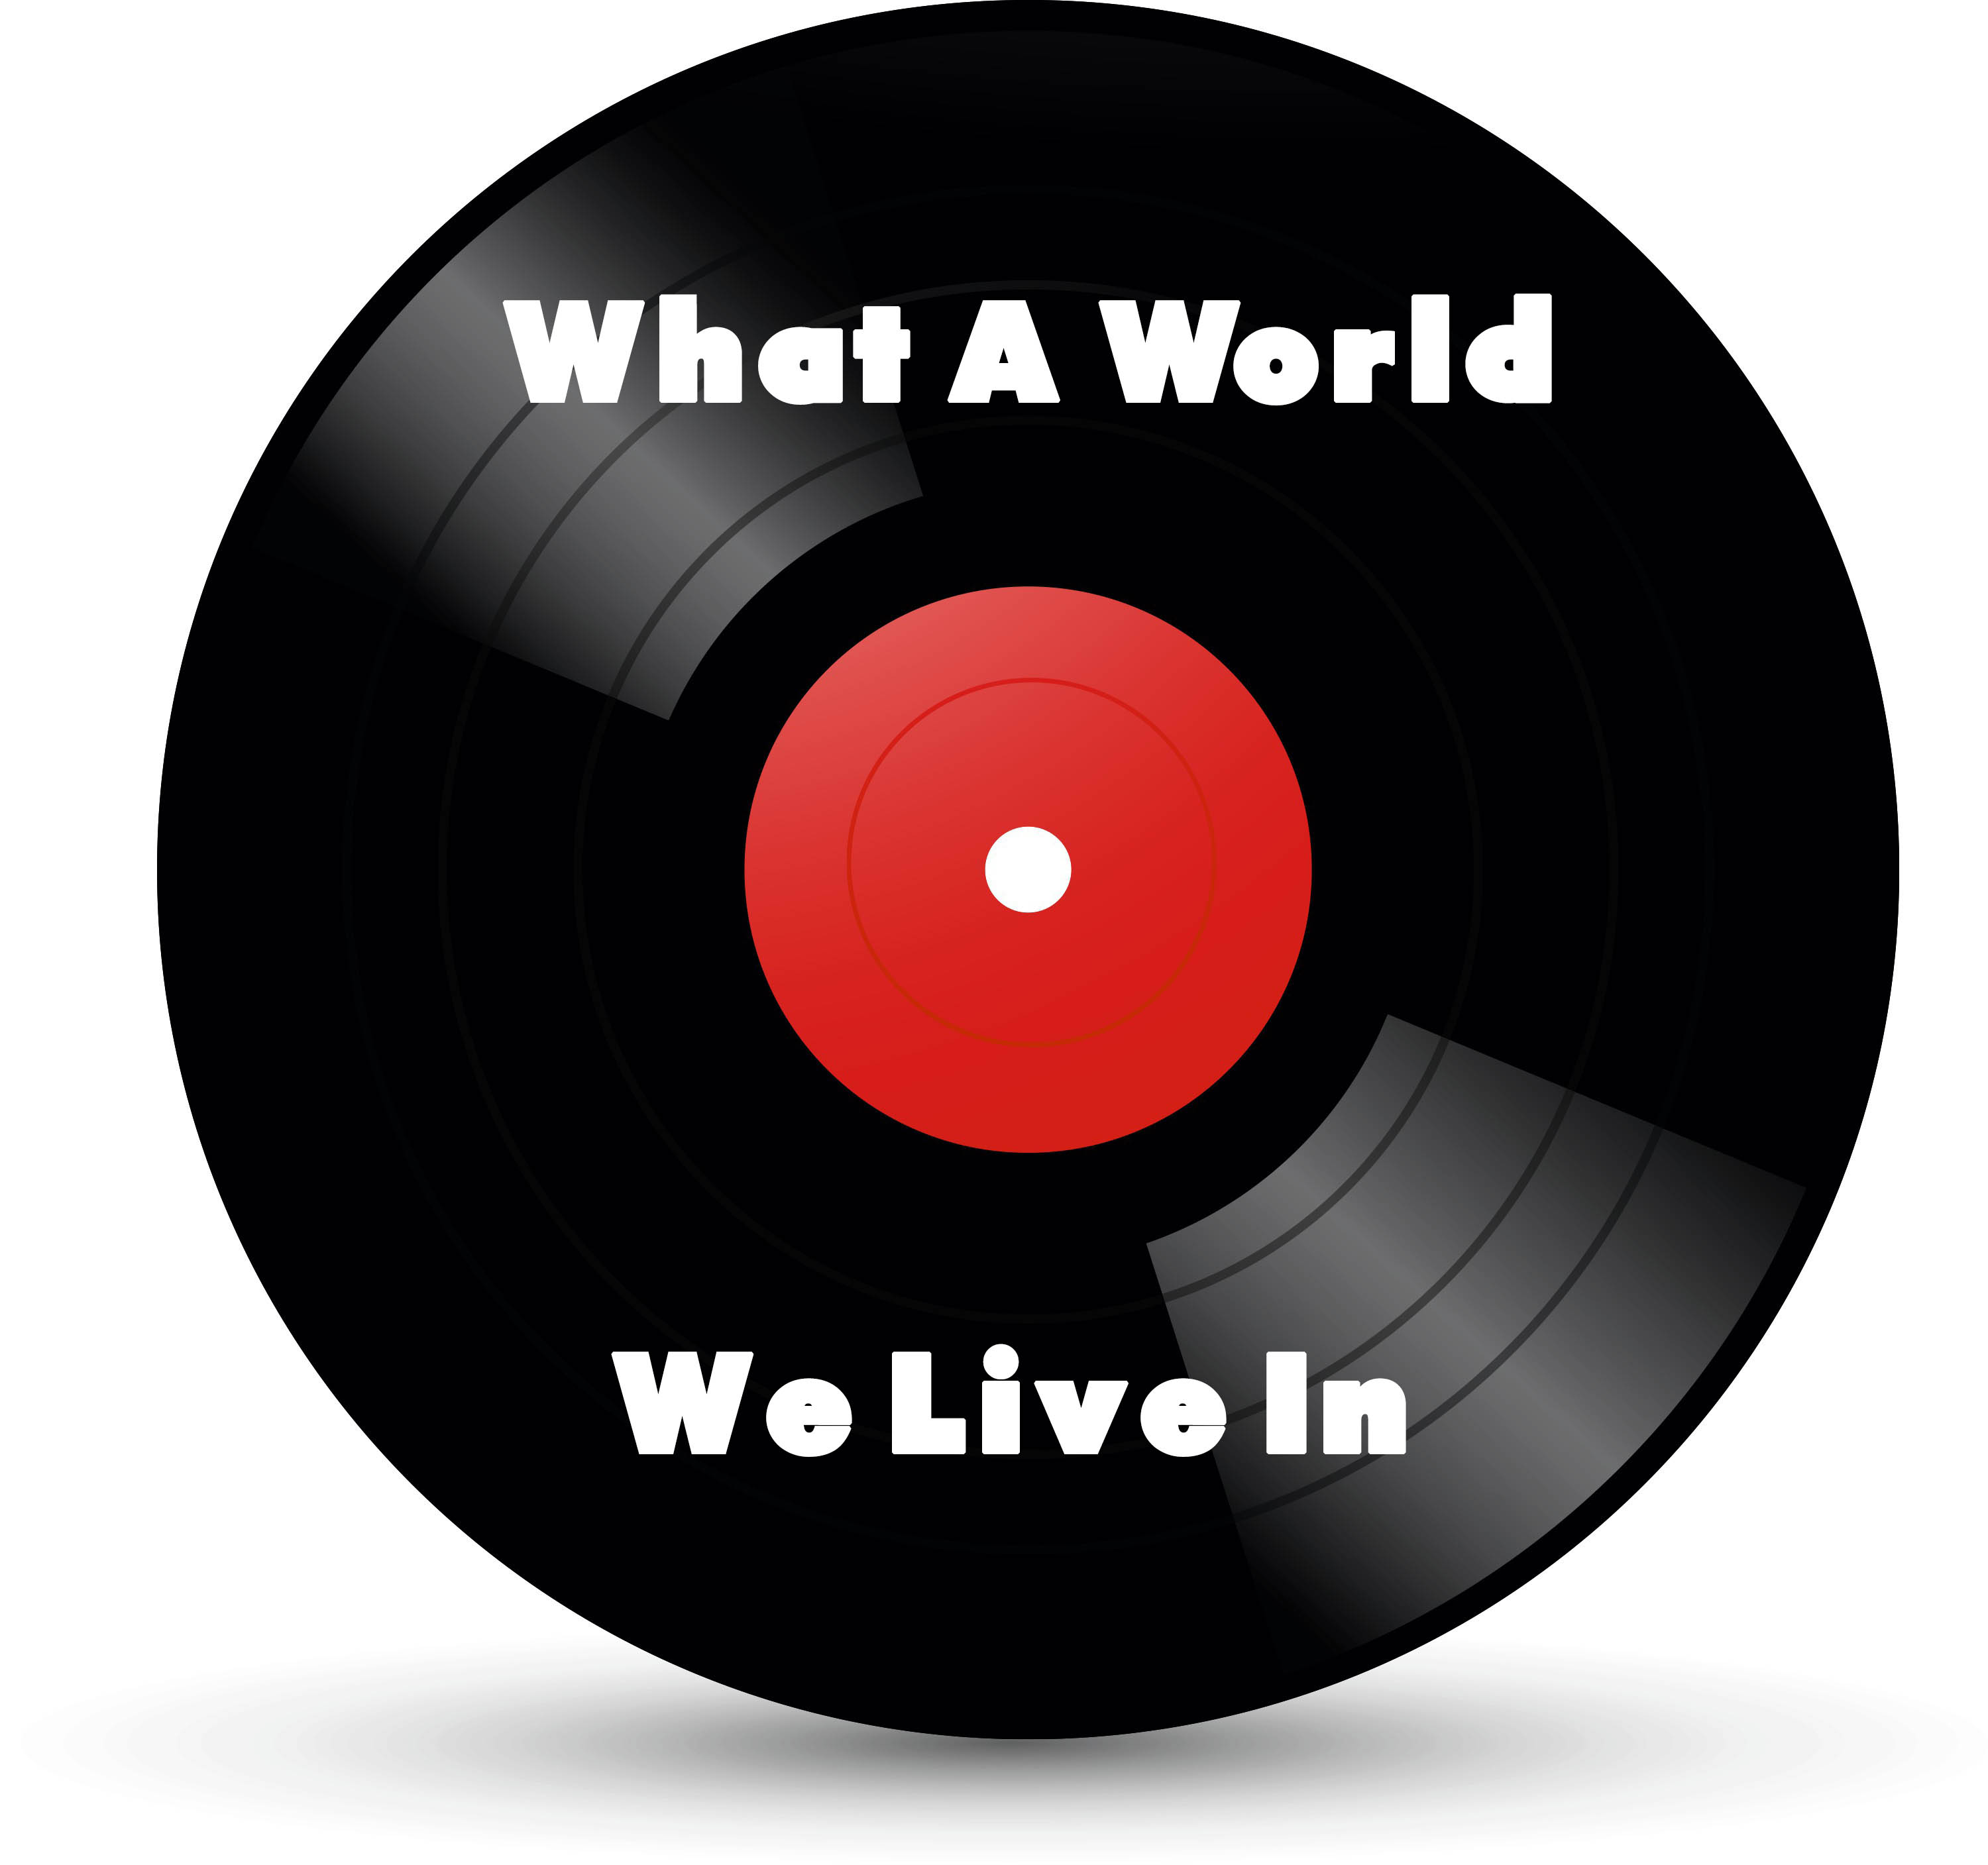 DAQ - "What A World We Live In" Song